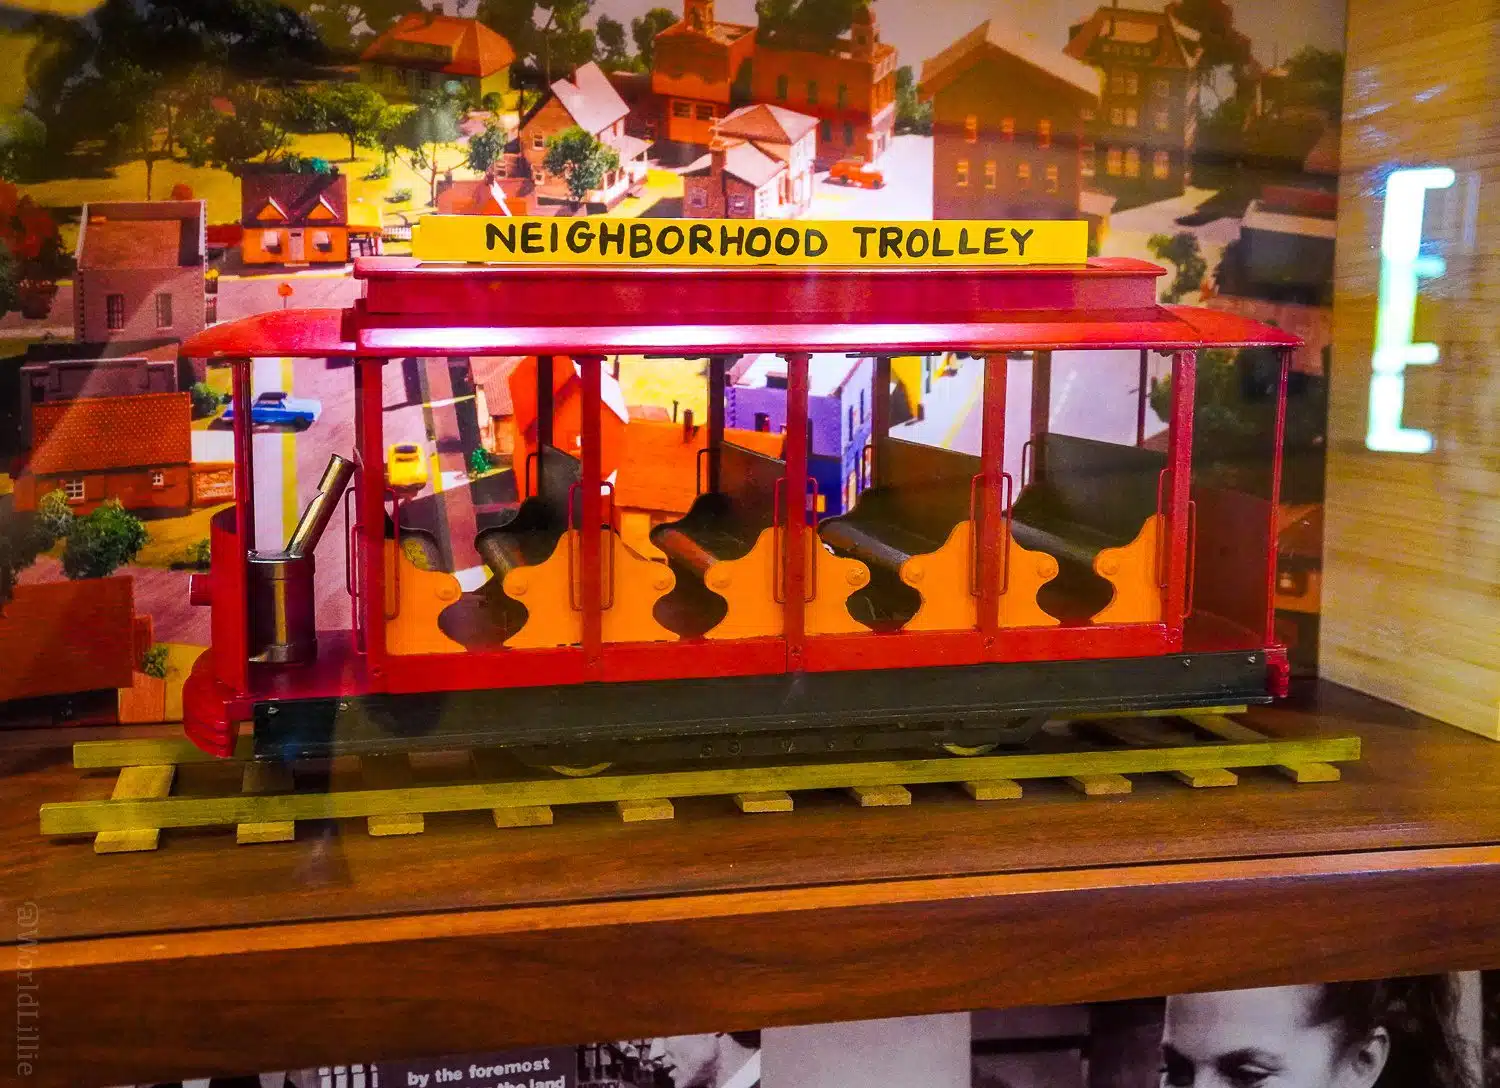 A close-up of the Neighborhood Trolley from Mister Rogers.